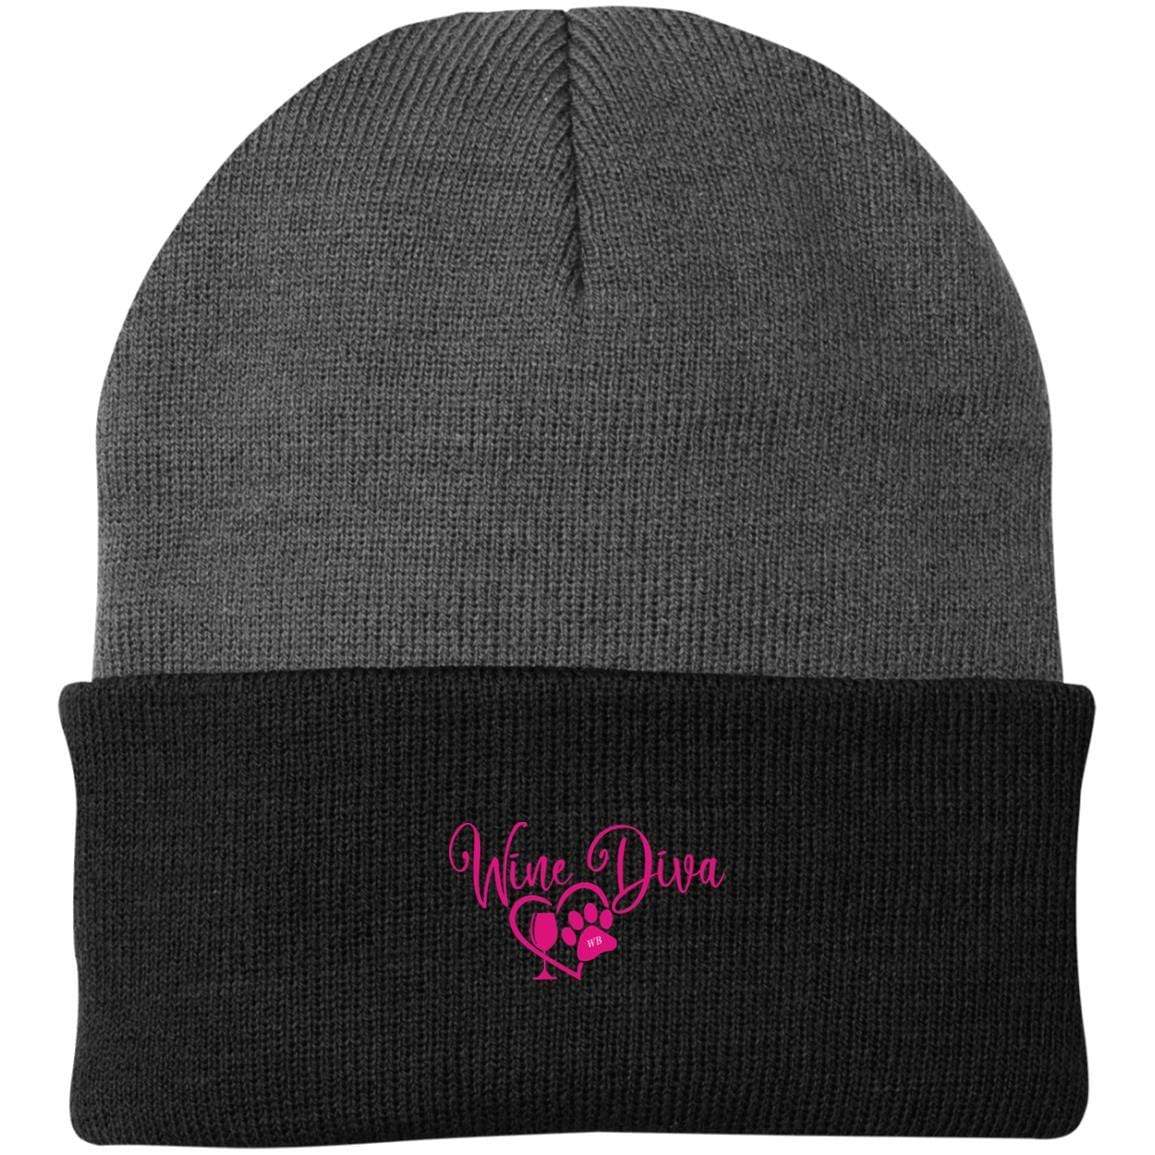 Hats Athletic Oxford/Black / One Size Winey Bitches Co "Wine Diva" Embroidered Knit Cap WineyBitchesCo